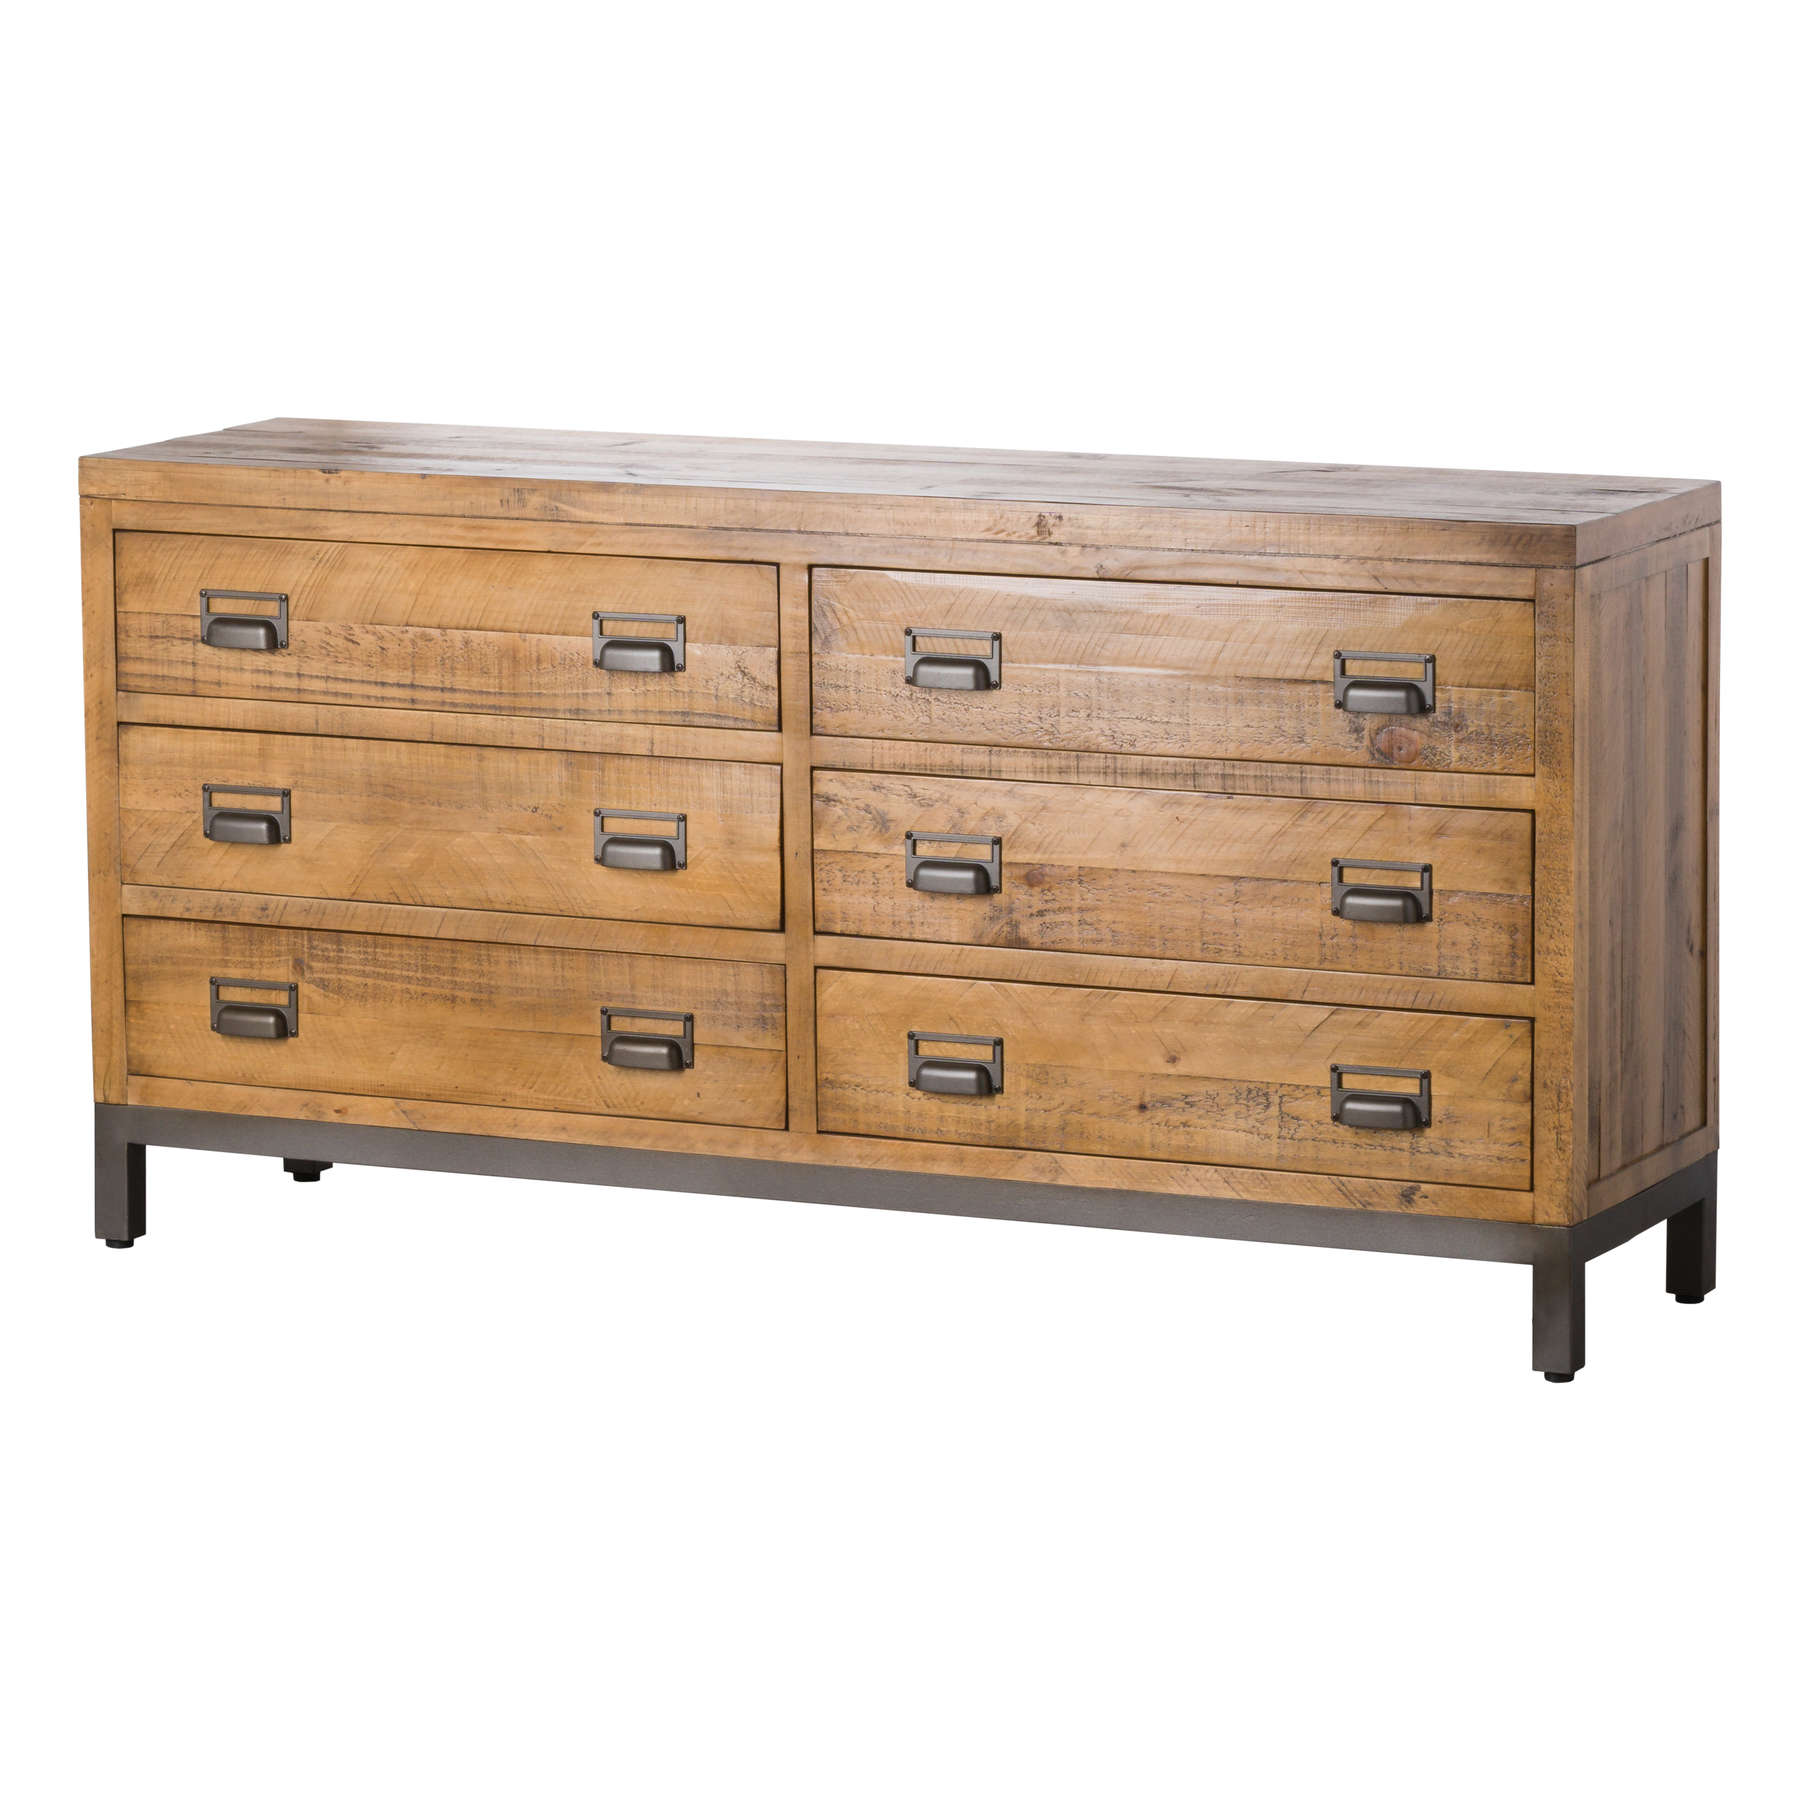 The Draftsman Collection Six Drawer Chest - Image 1